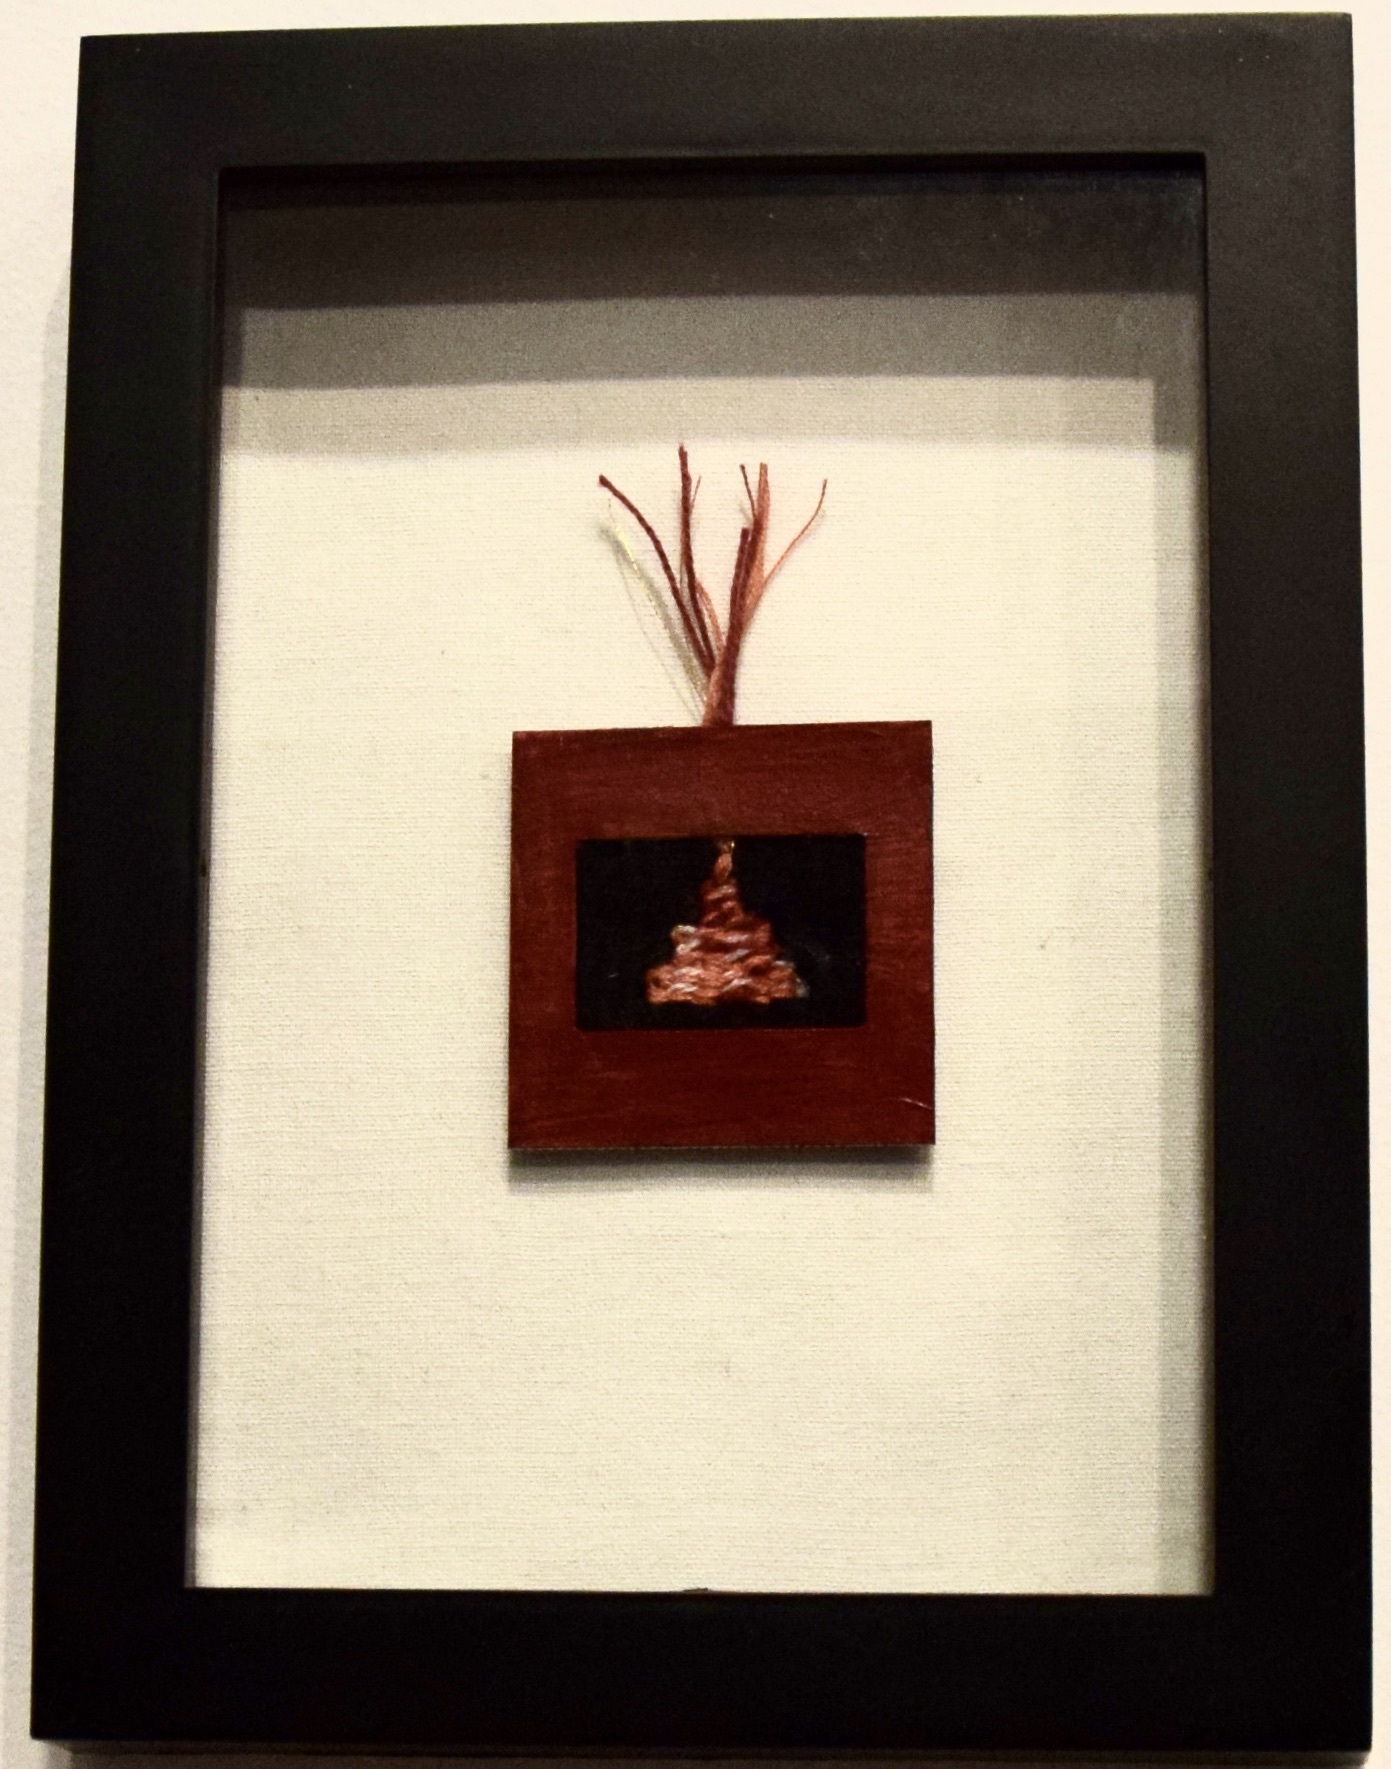 "Fire" Miniature Tapestry in a Shadow Box - FOR SALE $125